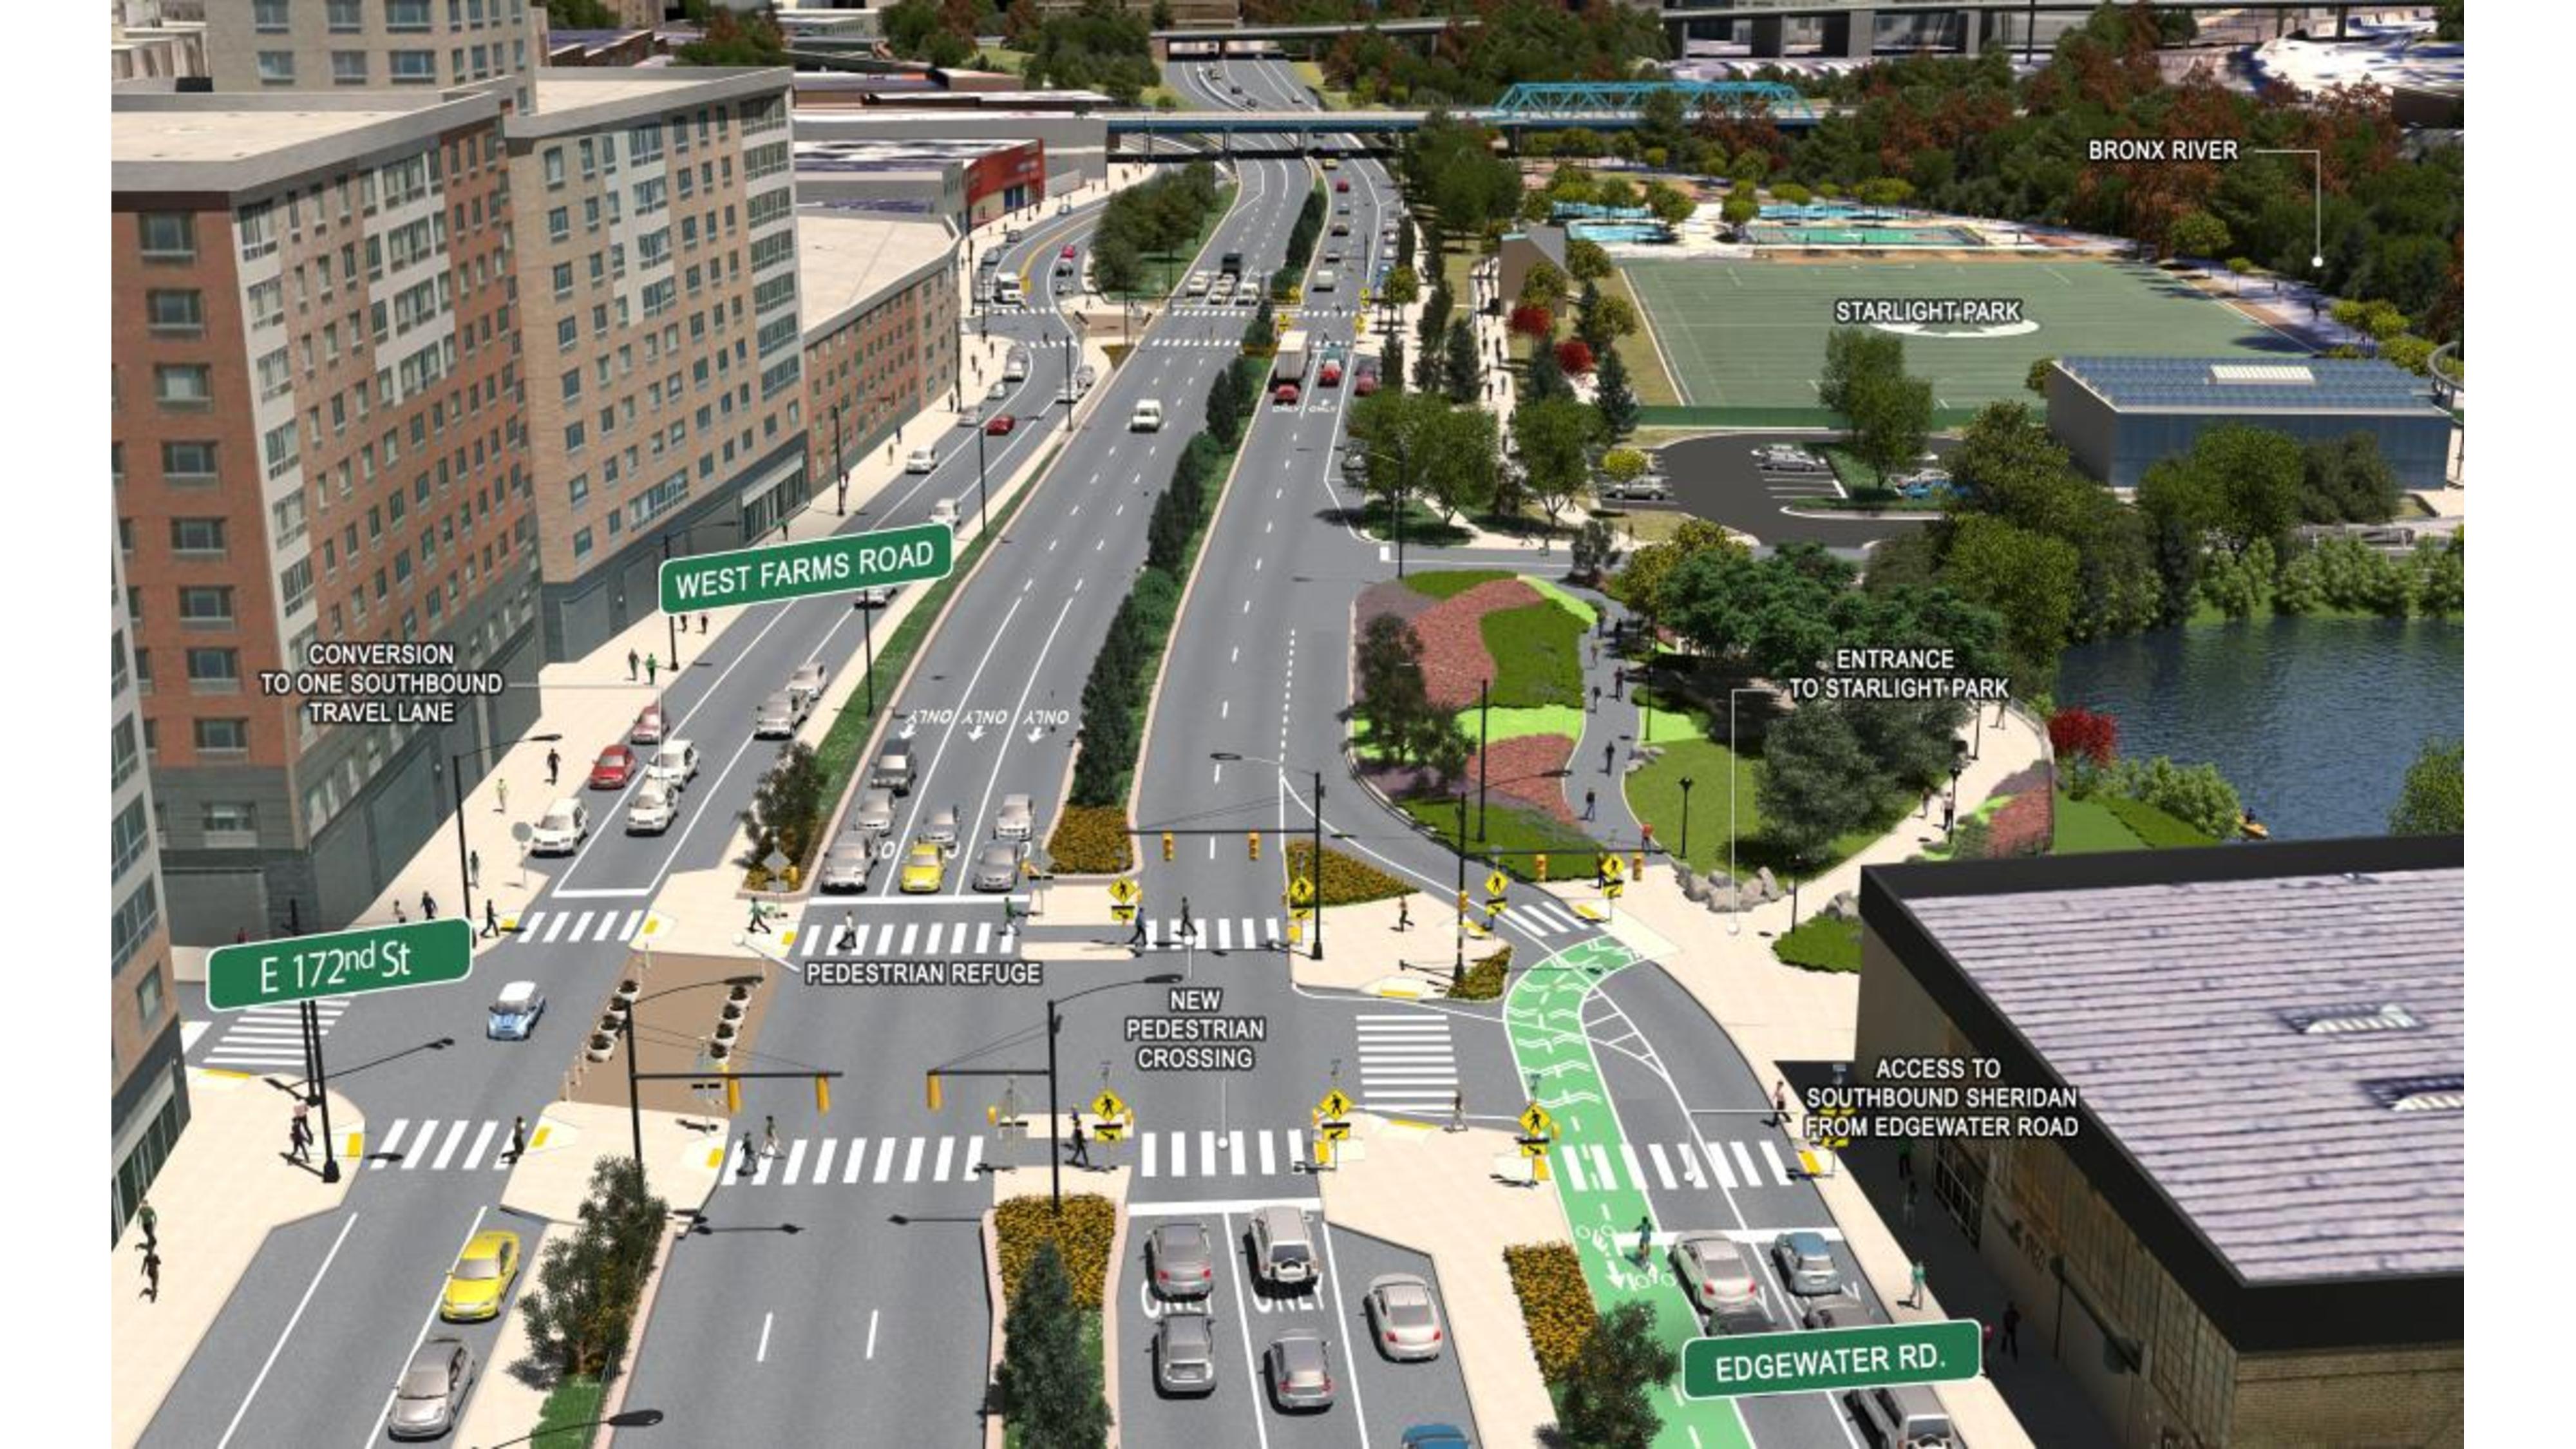 Governor Cuomo Announces NY Has Received Federal Approval To Convert Sheridan Expressway In Bronx Into A Boulevard